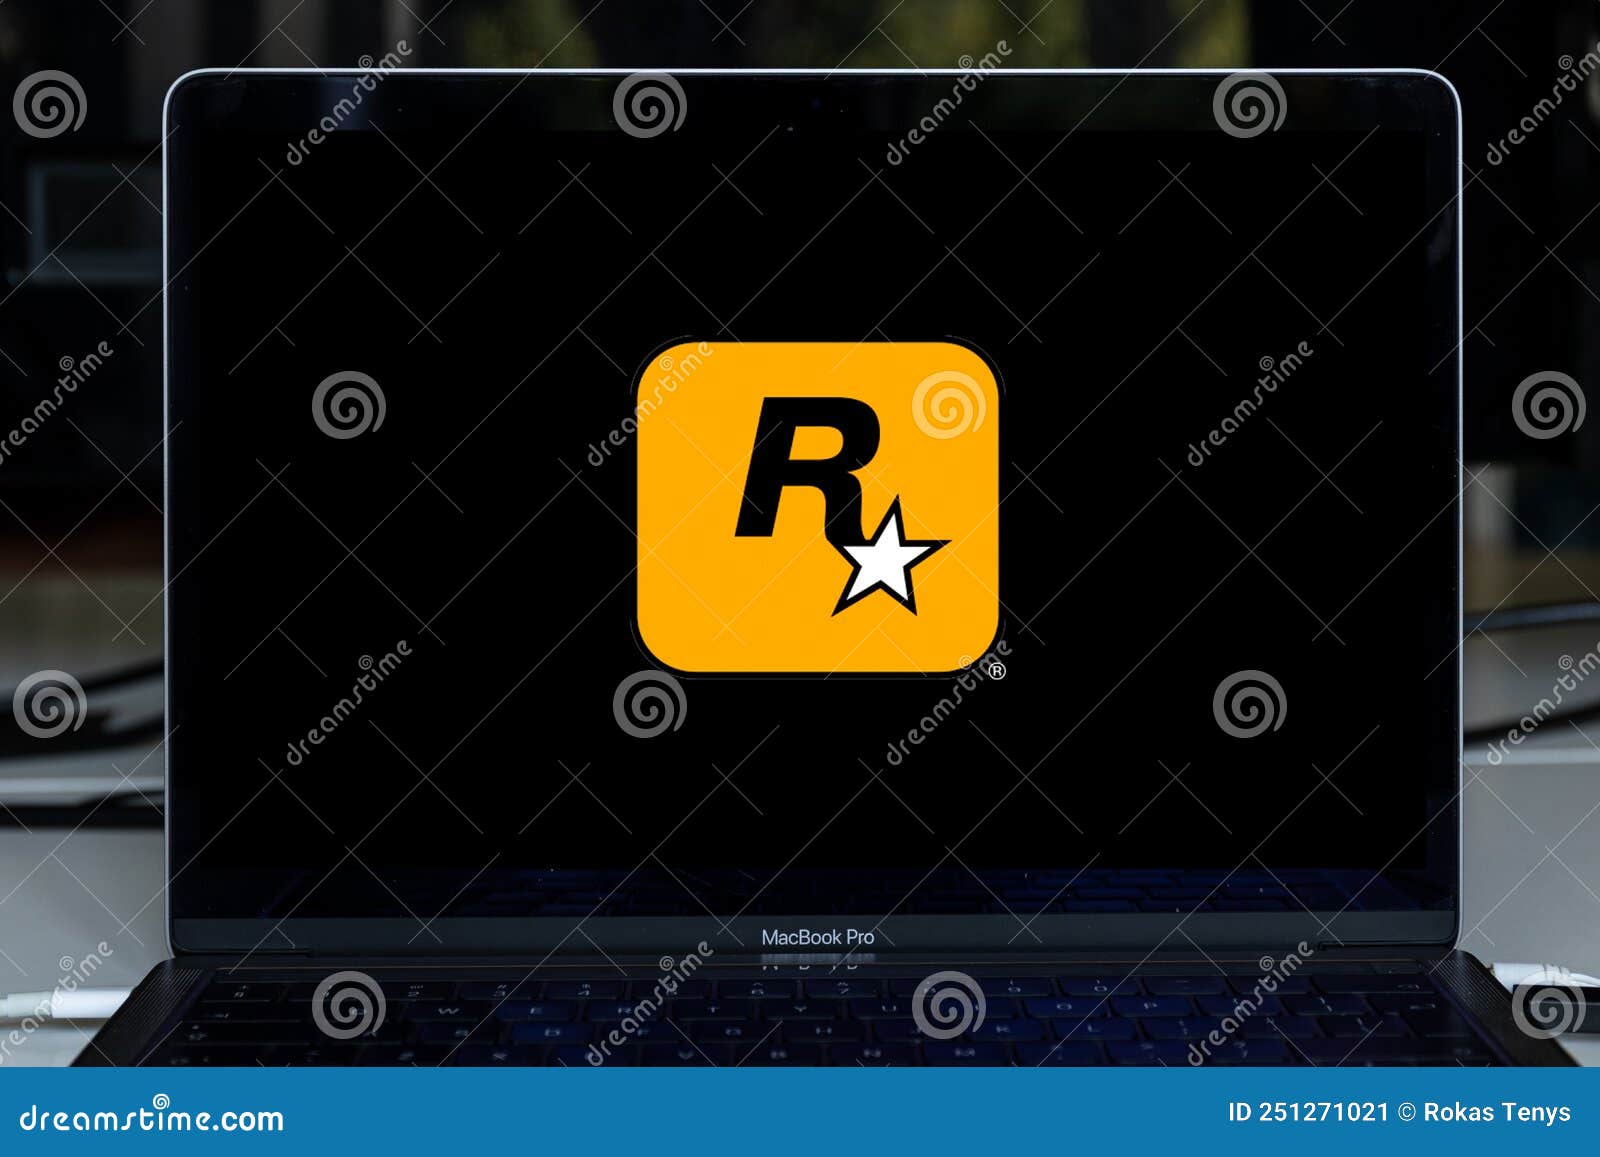 monitor logo Rockstar Games software house producer of video games, famous  for Grand Theft Auto and Red Dead Redemption Stock Photo